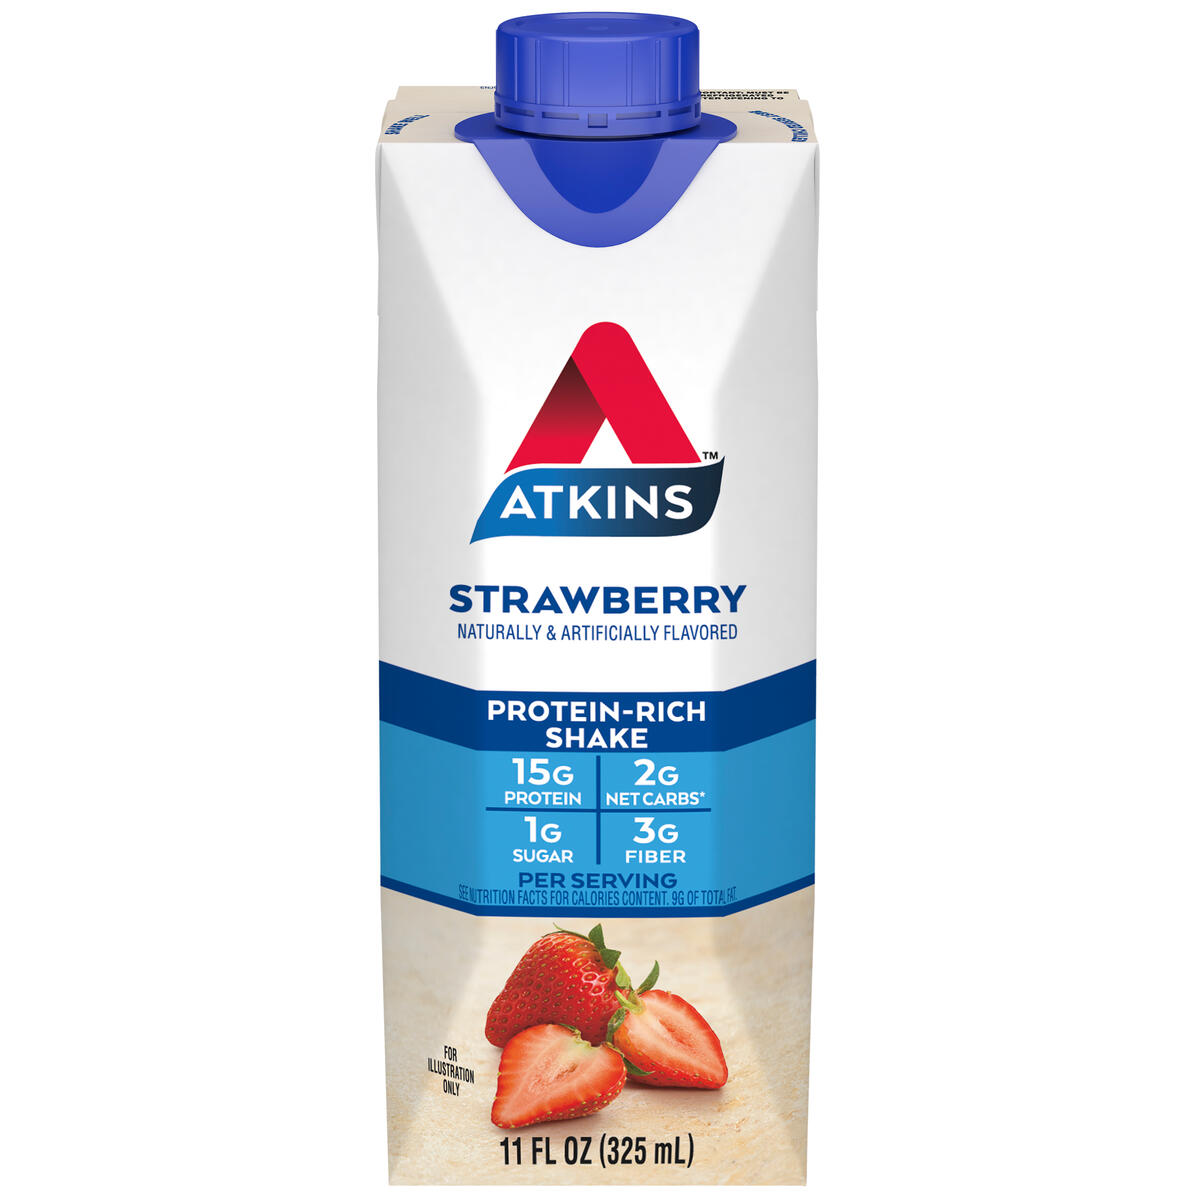 Atkins Protein Shake, Strawberry, Keto Friendly, 15g of Protein, 12 Ct (Ready to Drink) - image 3 of 9